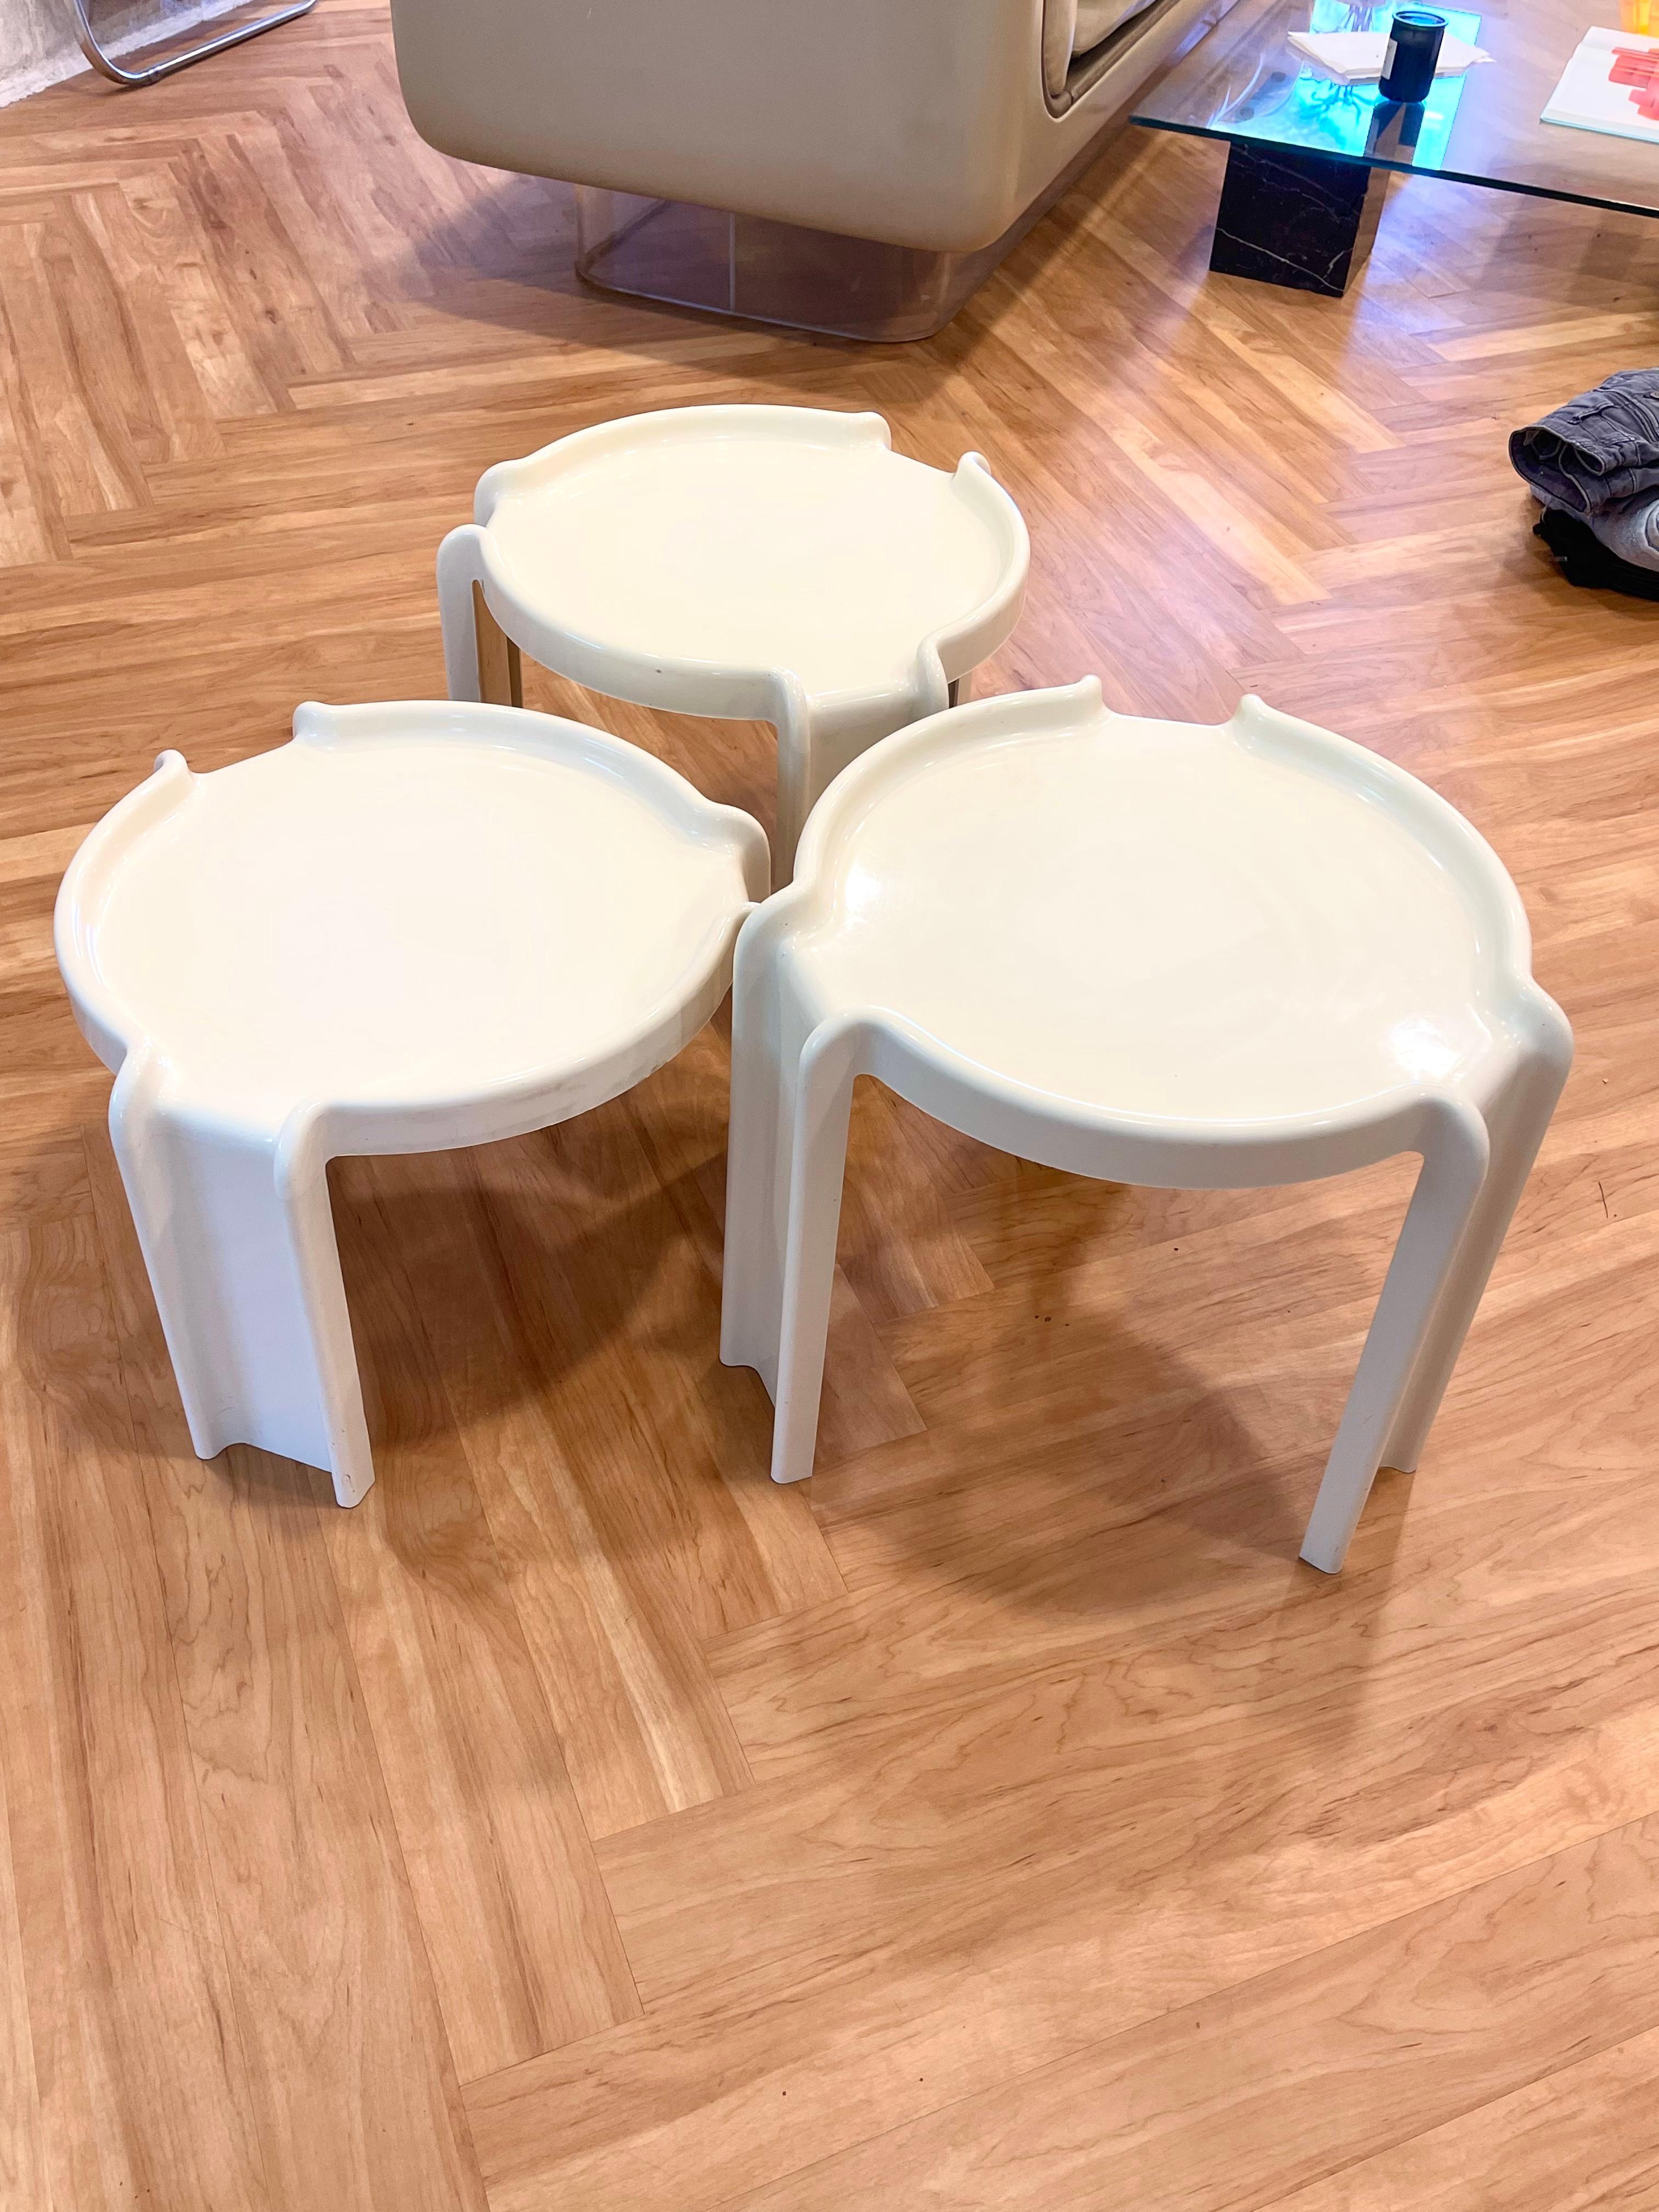 Beautiful set of 3 vintage stacking tables in cream molded ABS plastic by Giotto Stoppino for Kartell, 1973. Lovely example in good condition with minor age-related wear.